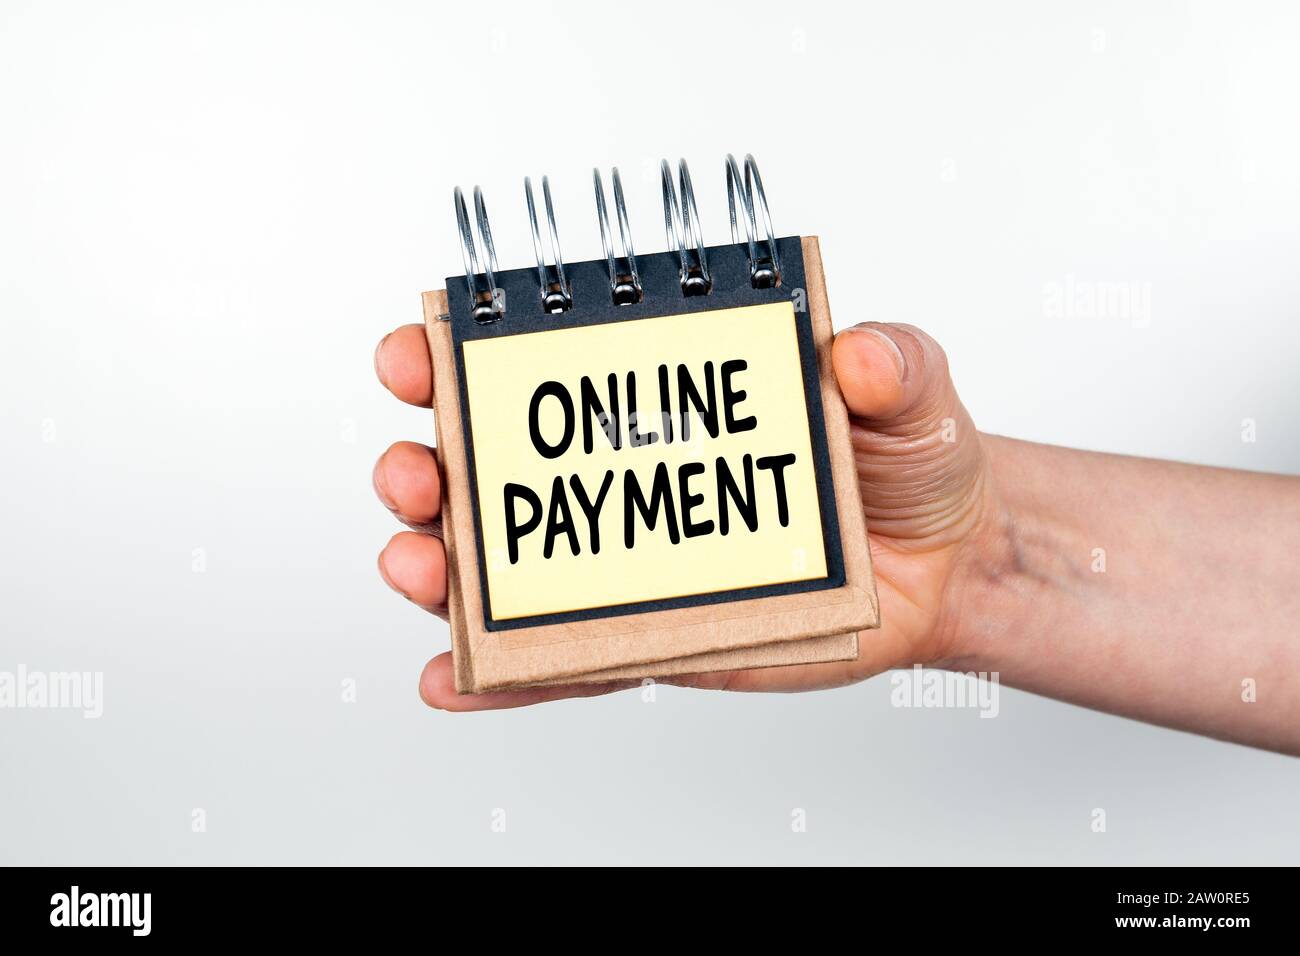 Online Payment. Purchase, Sale, Transfers and Financial Transactions Concept. Note book in hand on white background Stock Photo